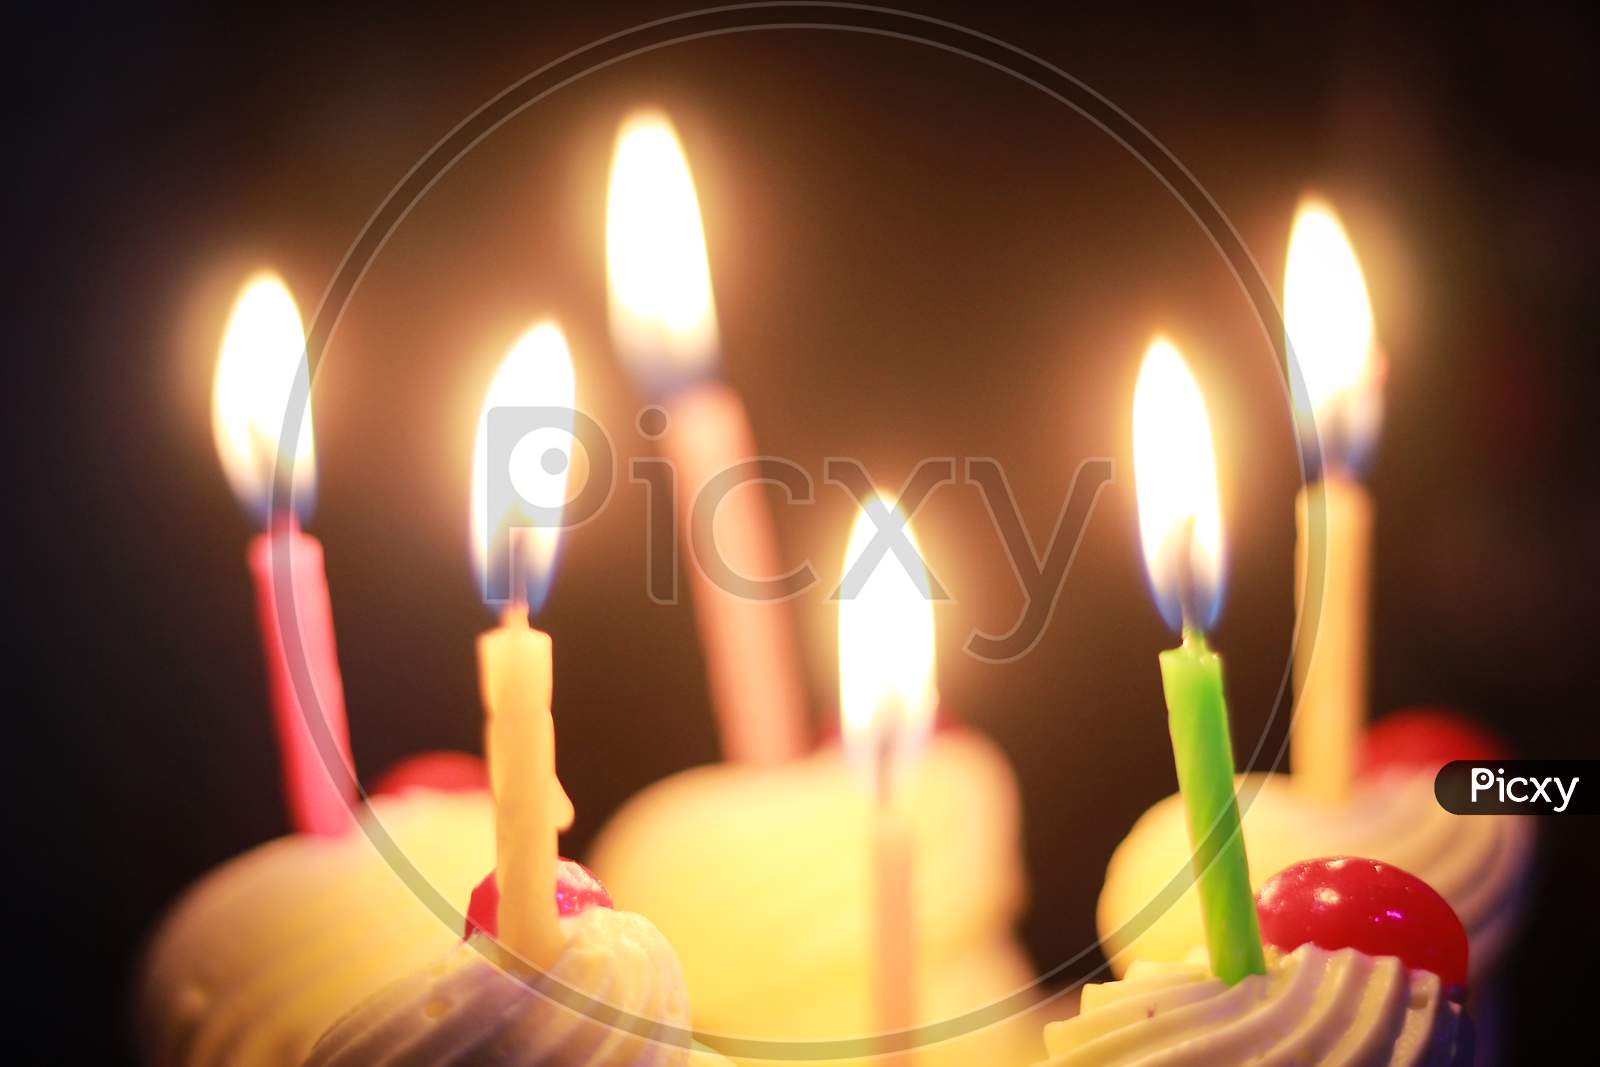 colorful birthday candles on a cake